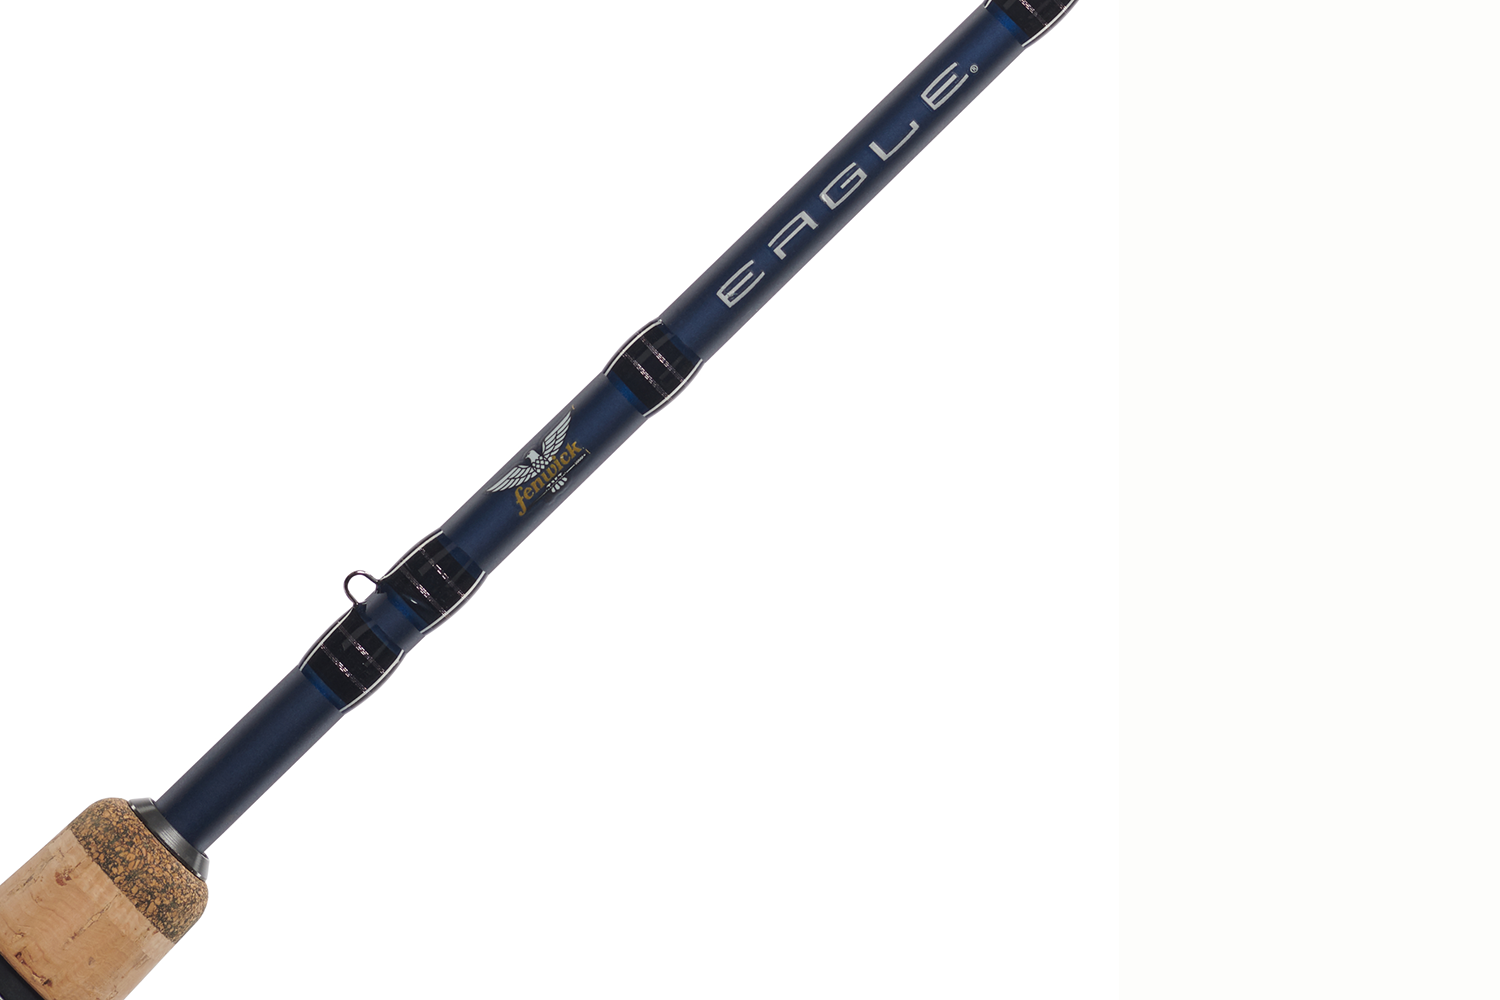 <p><b>Fenwick Eagle Rods</b></p>
<p>Built on a rich rod building history and featuring Classic Fenwick Actions, the Fenwick Eagle rod series is a proven winner for targeting nearly any species. Built from 24 Ton Graphite, the newly refreshed Eagle series features premium cork and TAC grips and upgraded stainless steel guides with aluminum oxide inserts to provide increased casting performance with less friction. A blank through construction and ergonomic minimal reel seat will transmit even the lightest bites. </p>
<p><a href=